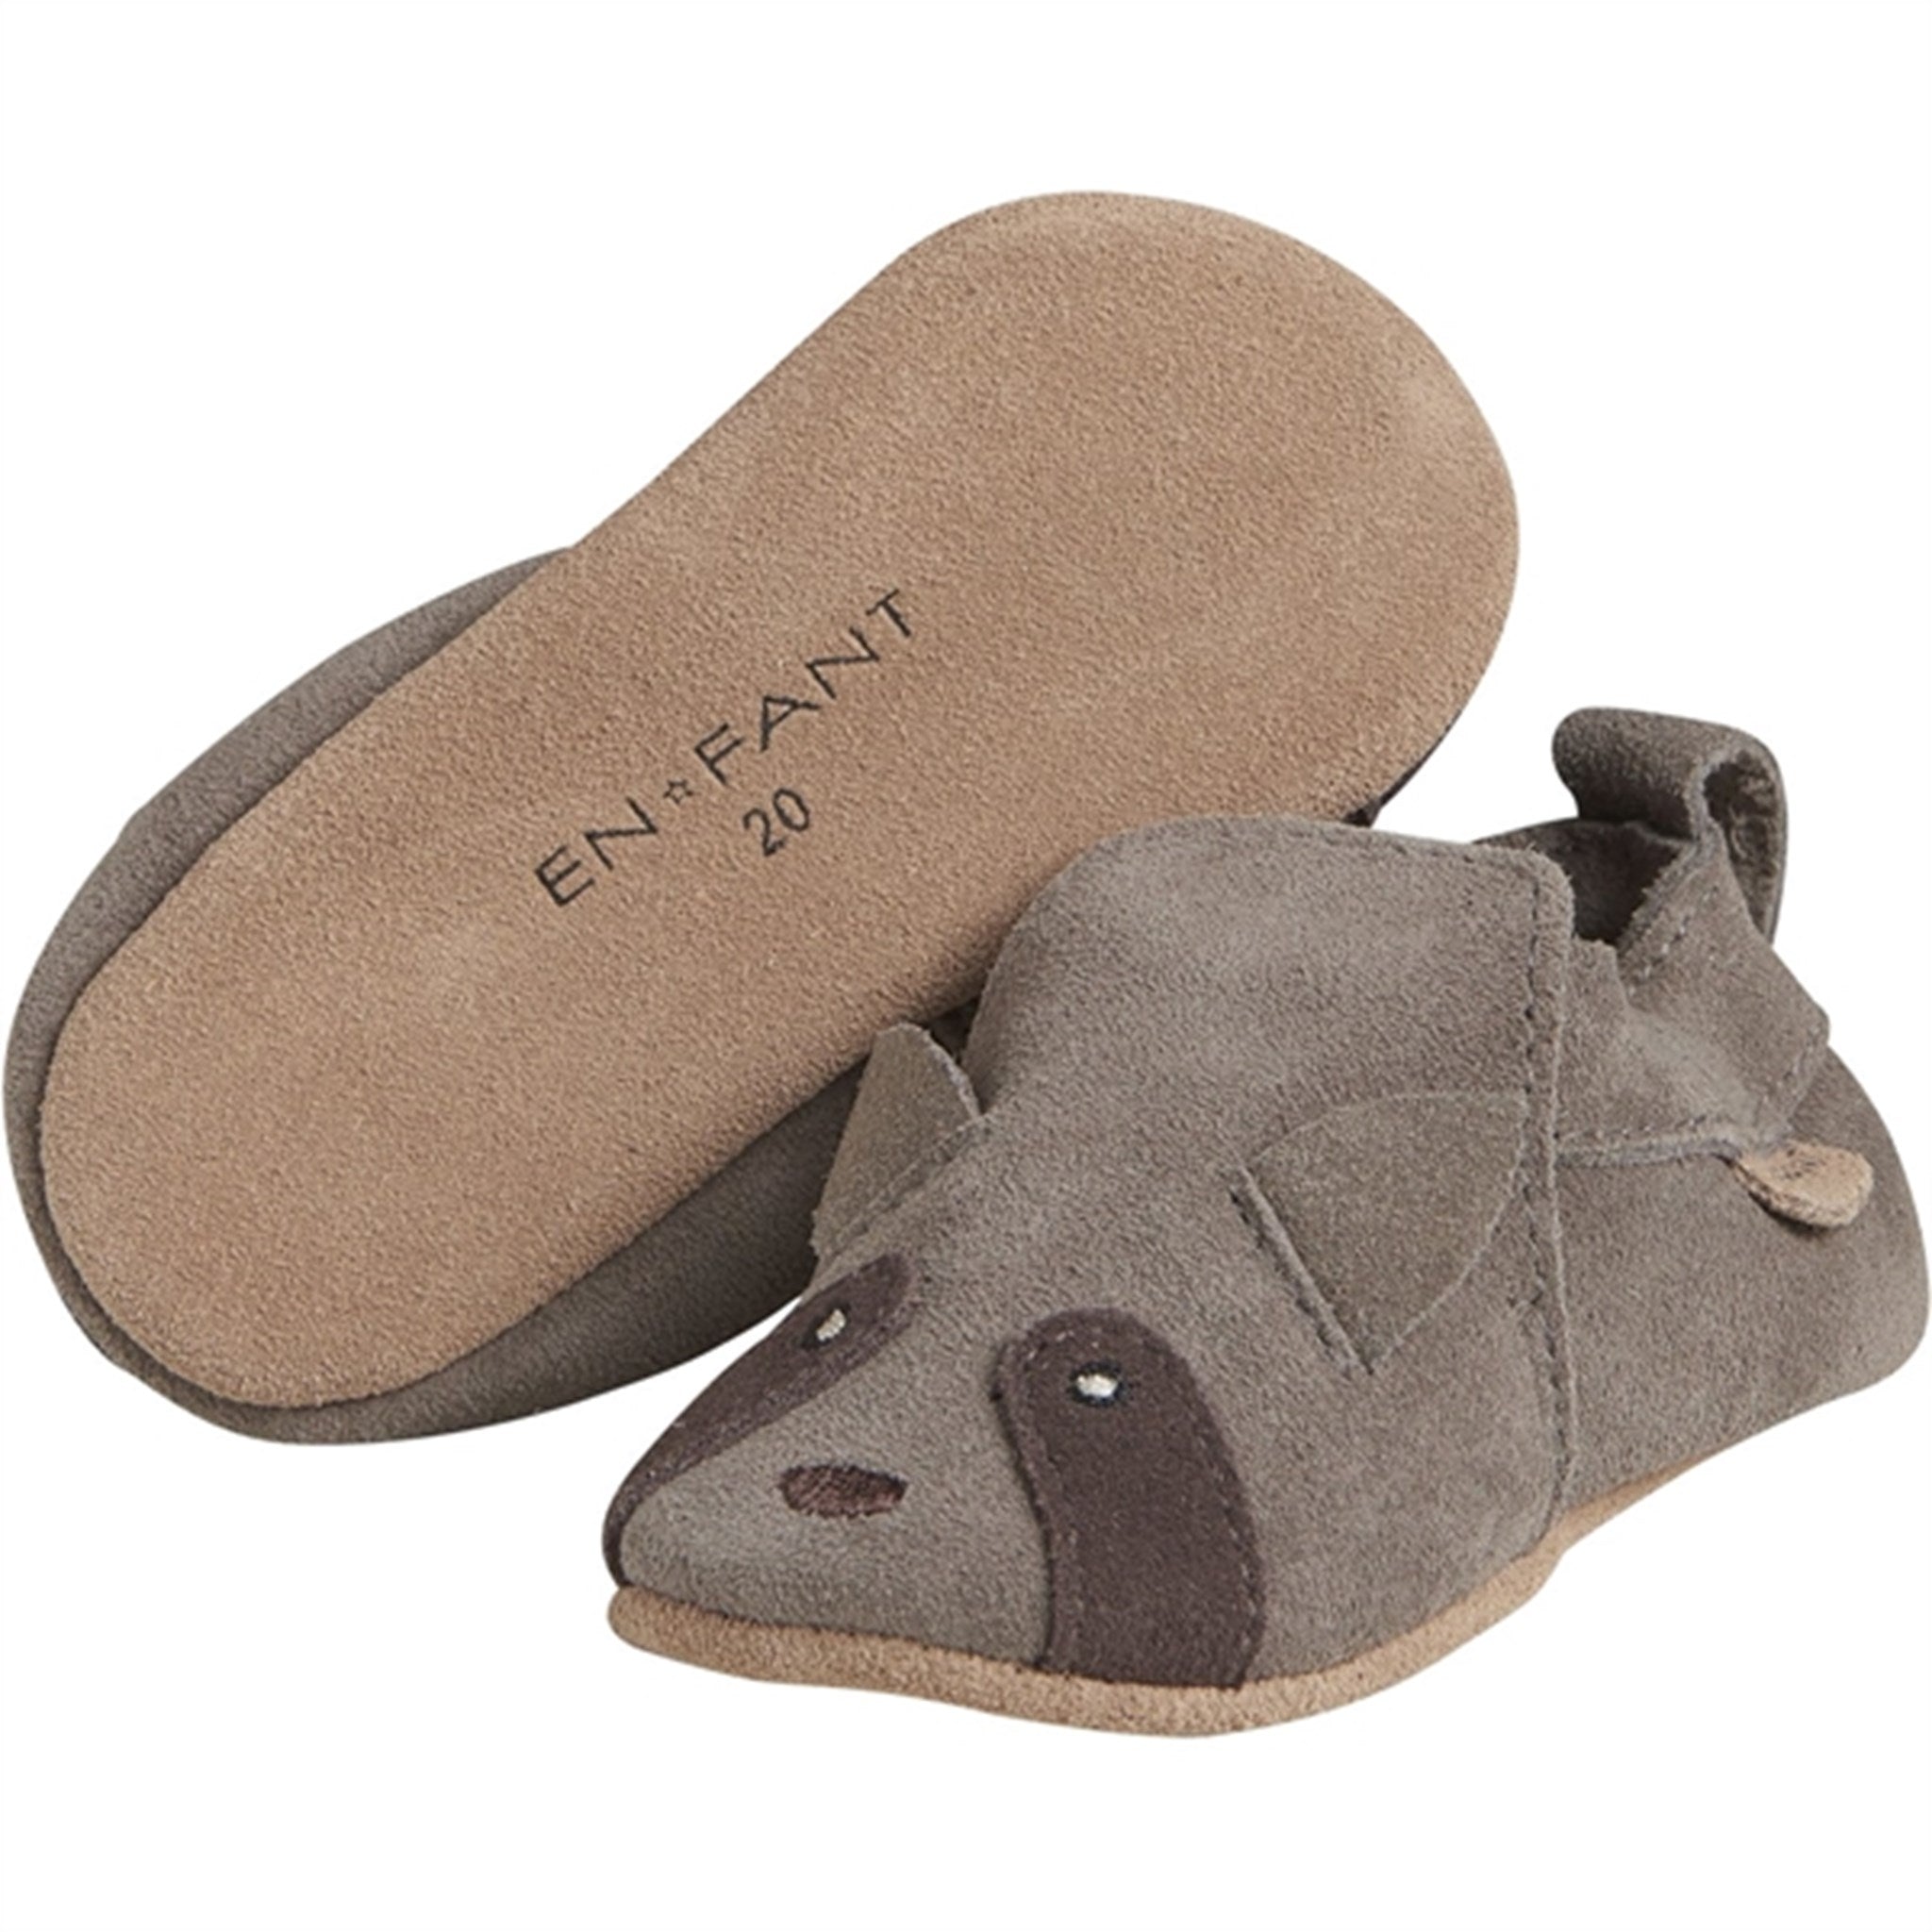 En Fant Slippers Ruskind Chocolate Chip 2